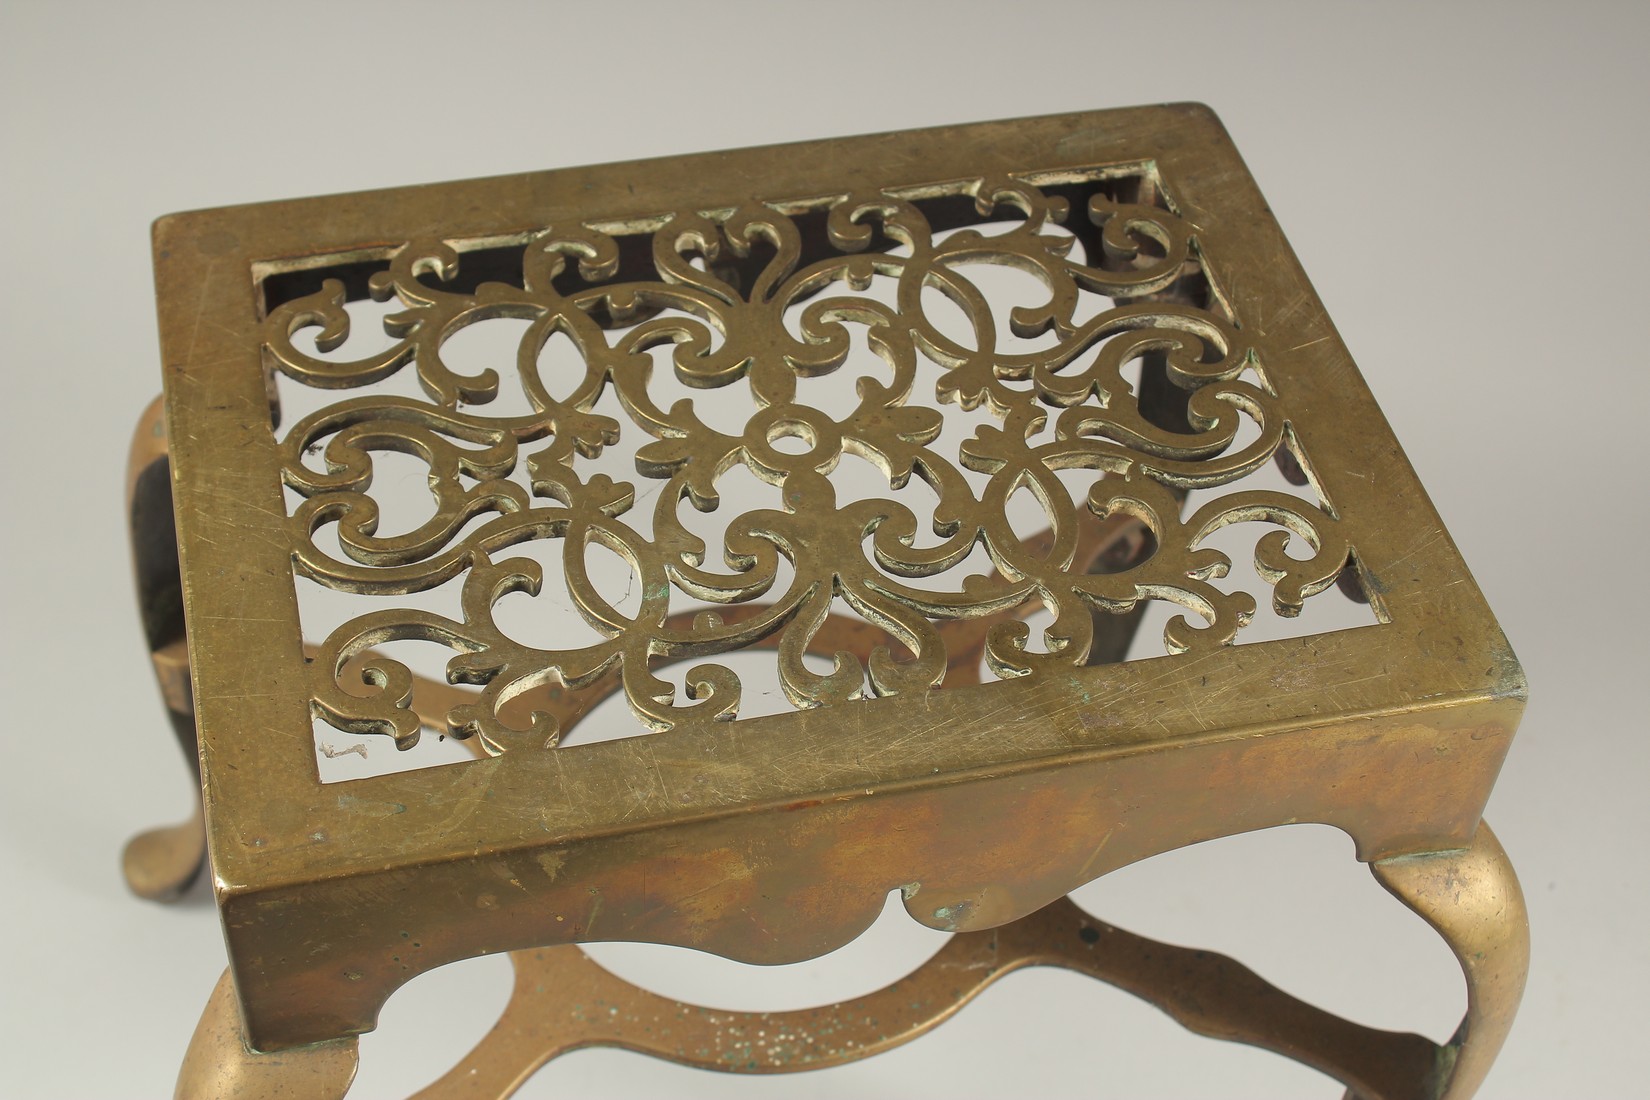 A LARGE BRASS TRIVET with pierced top and four curving legs. 1ft wide x 4ft high. - Image 2 of 3